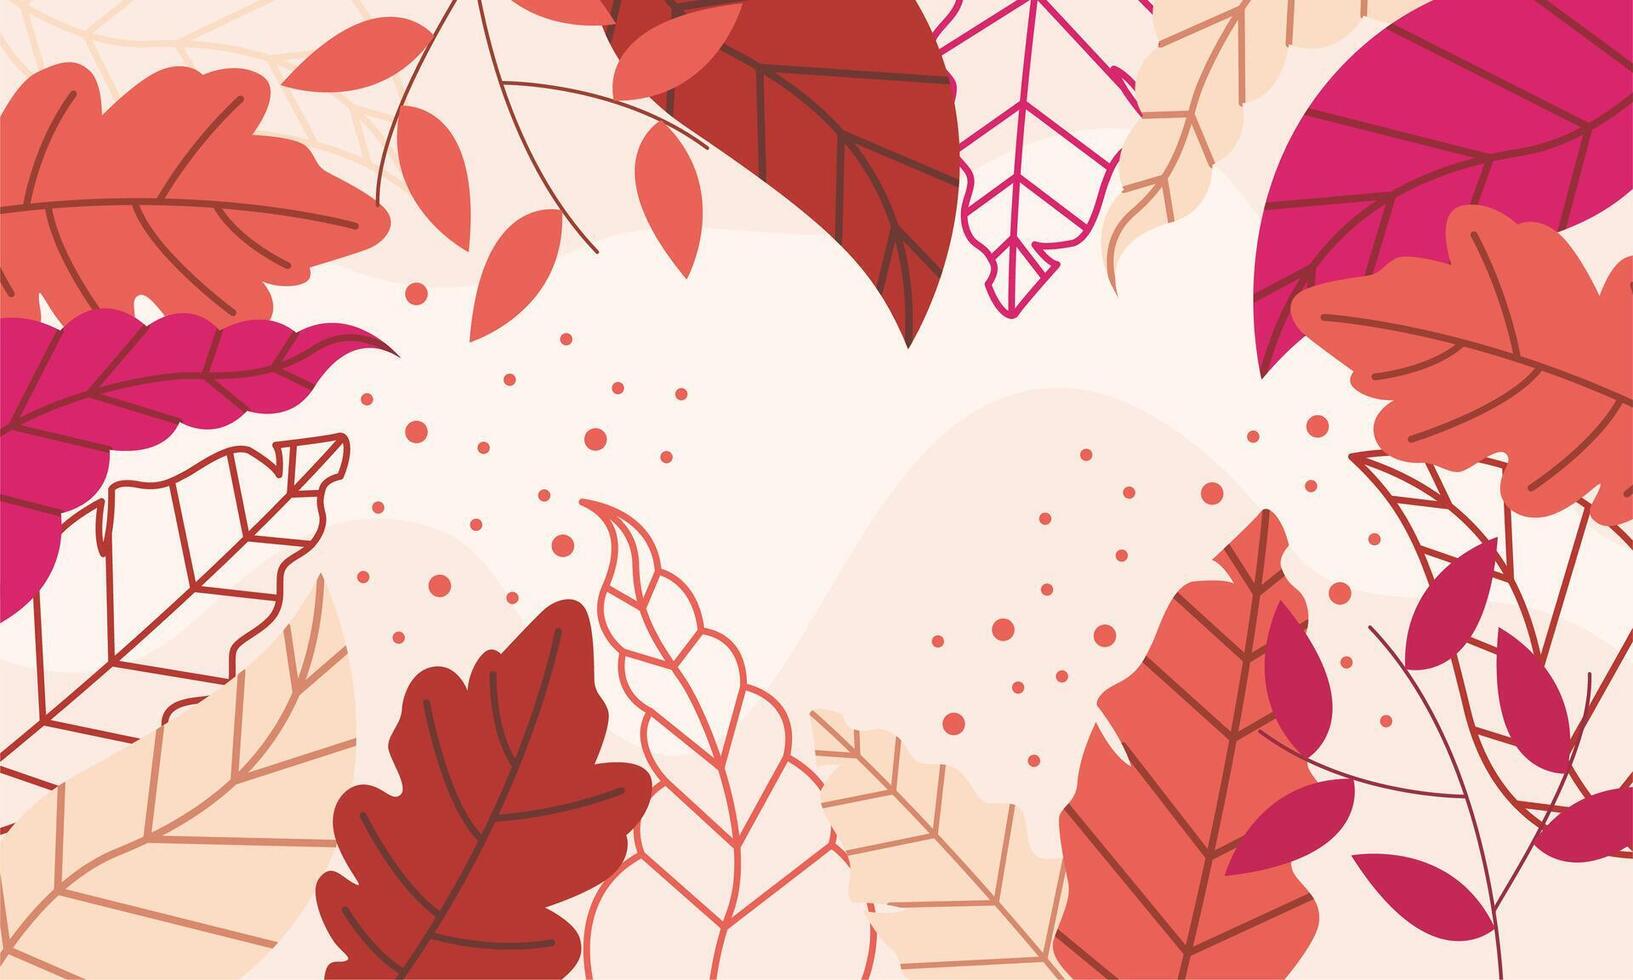 Flat design abstract floral background vector